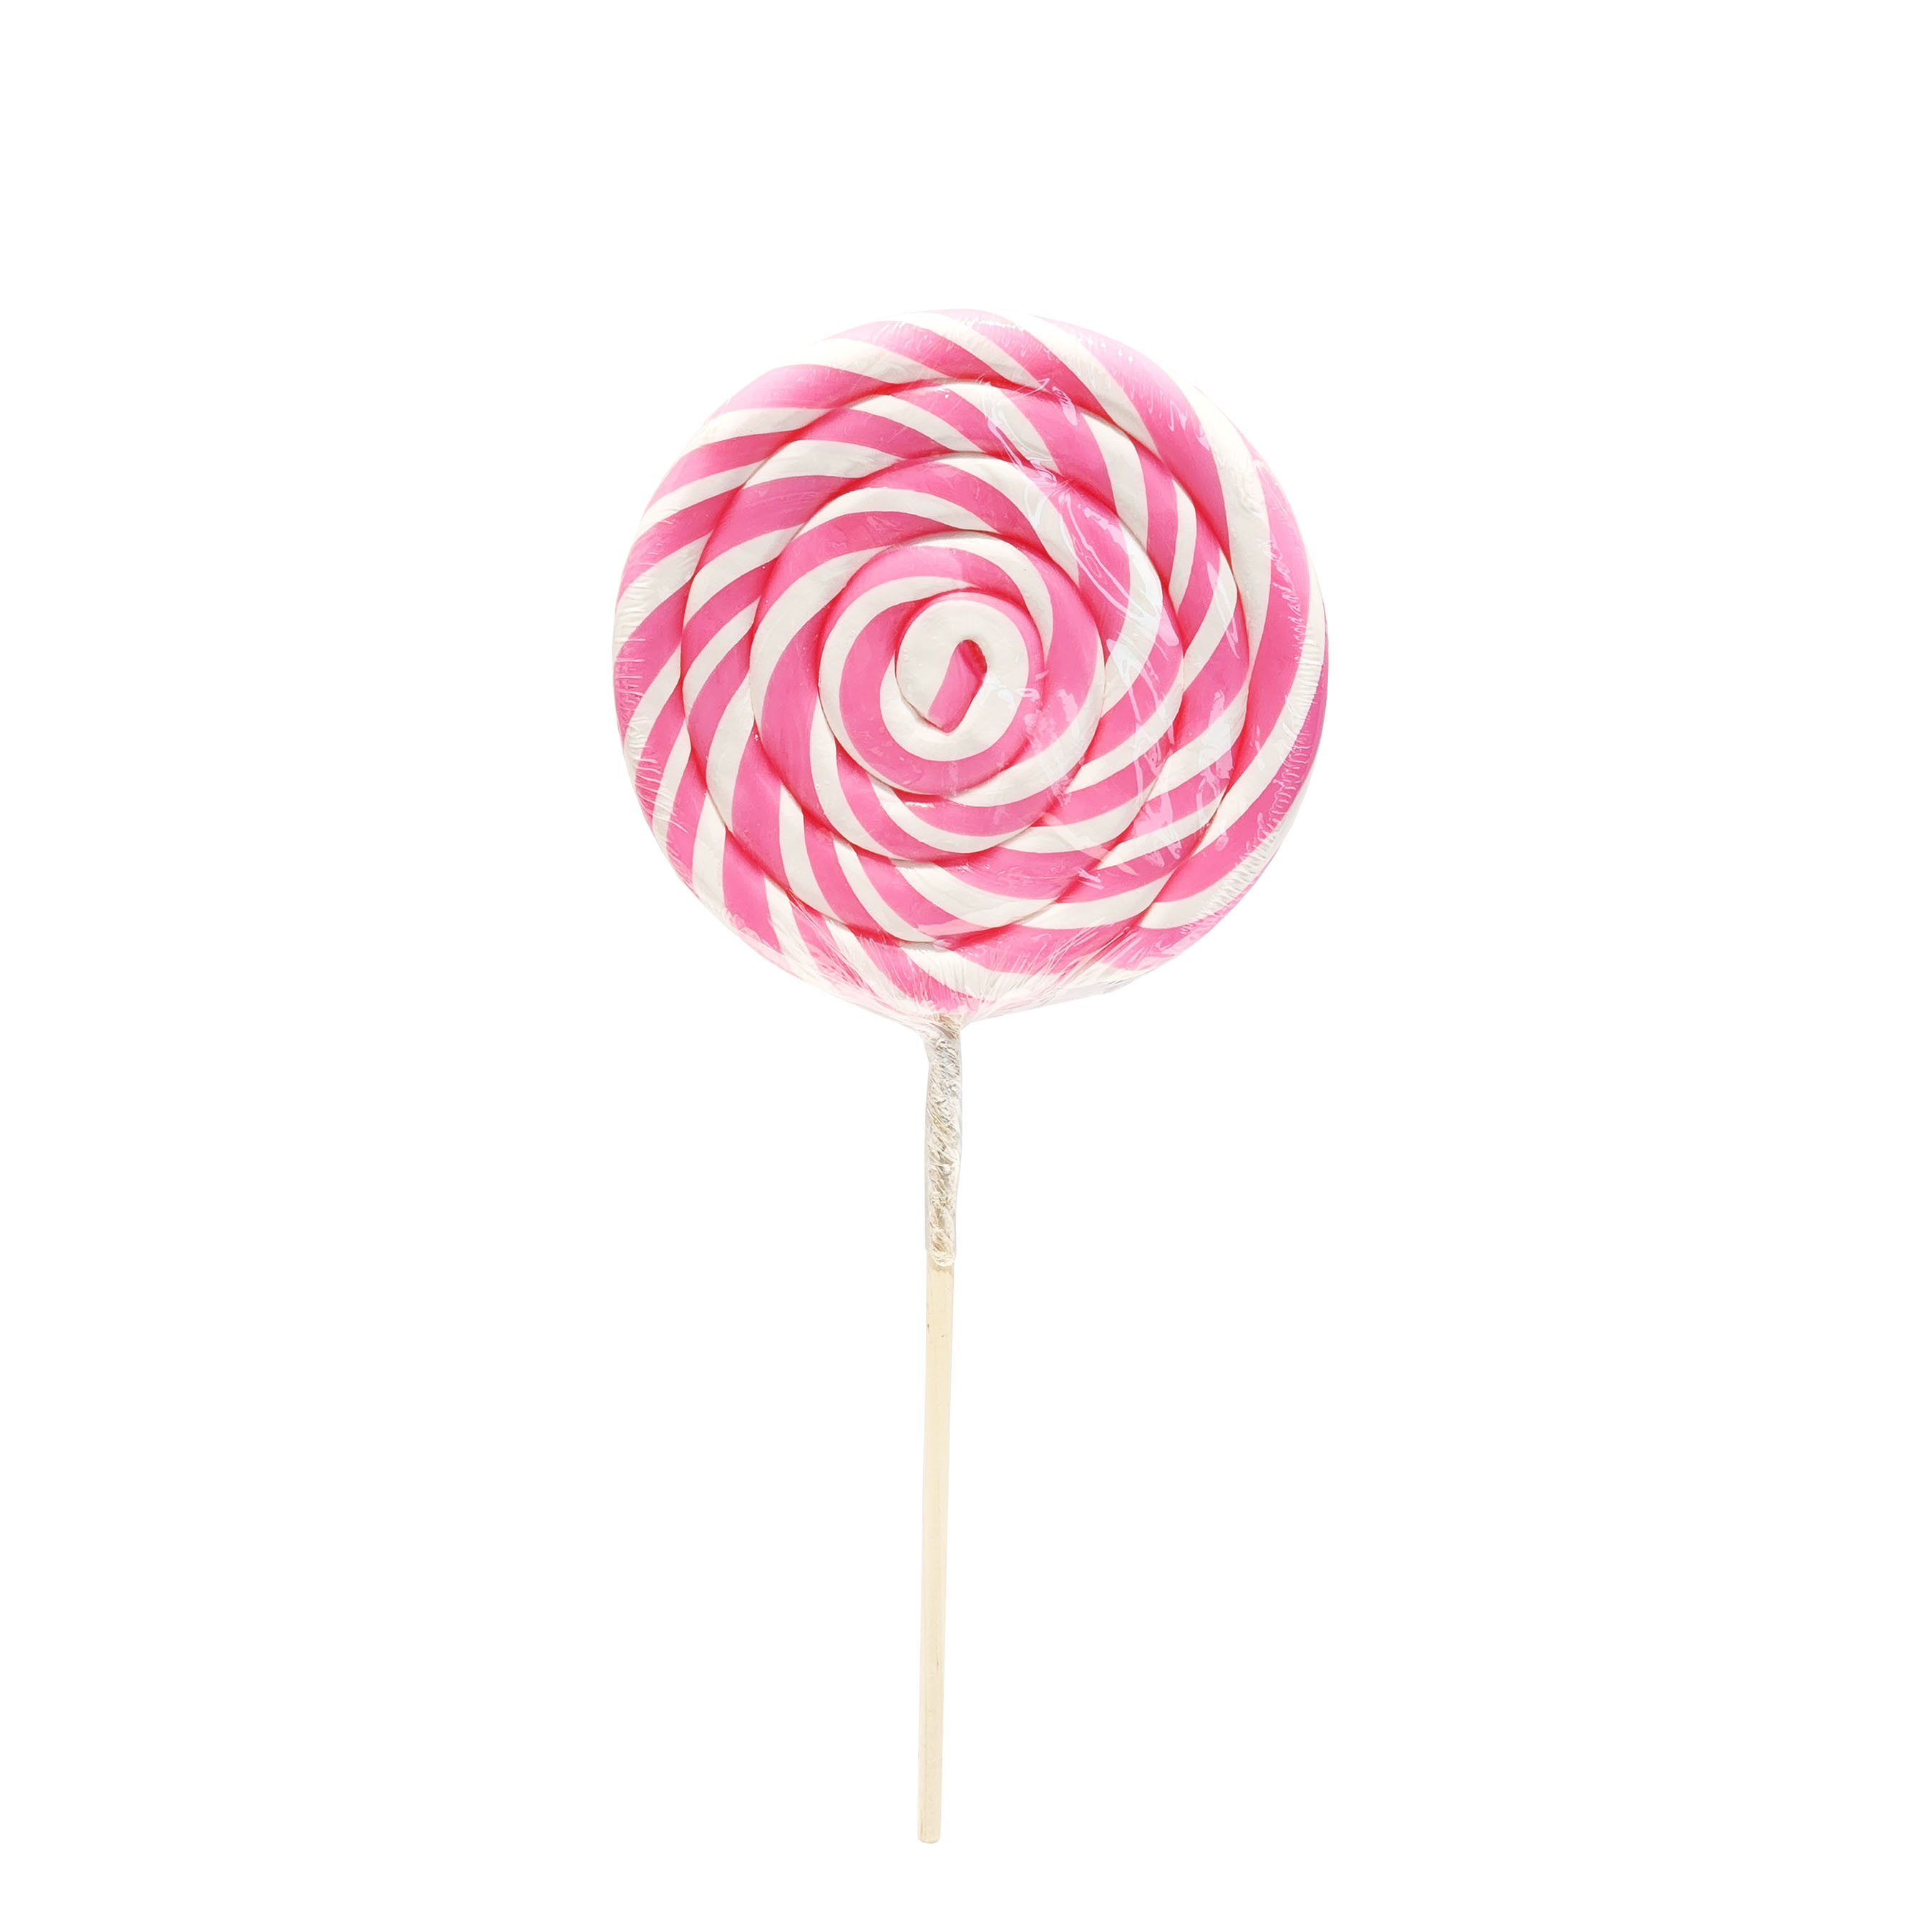 cotton candy flavored Swhirly sweet whirls. 180 grams, 5 inch diameter